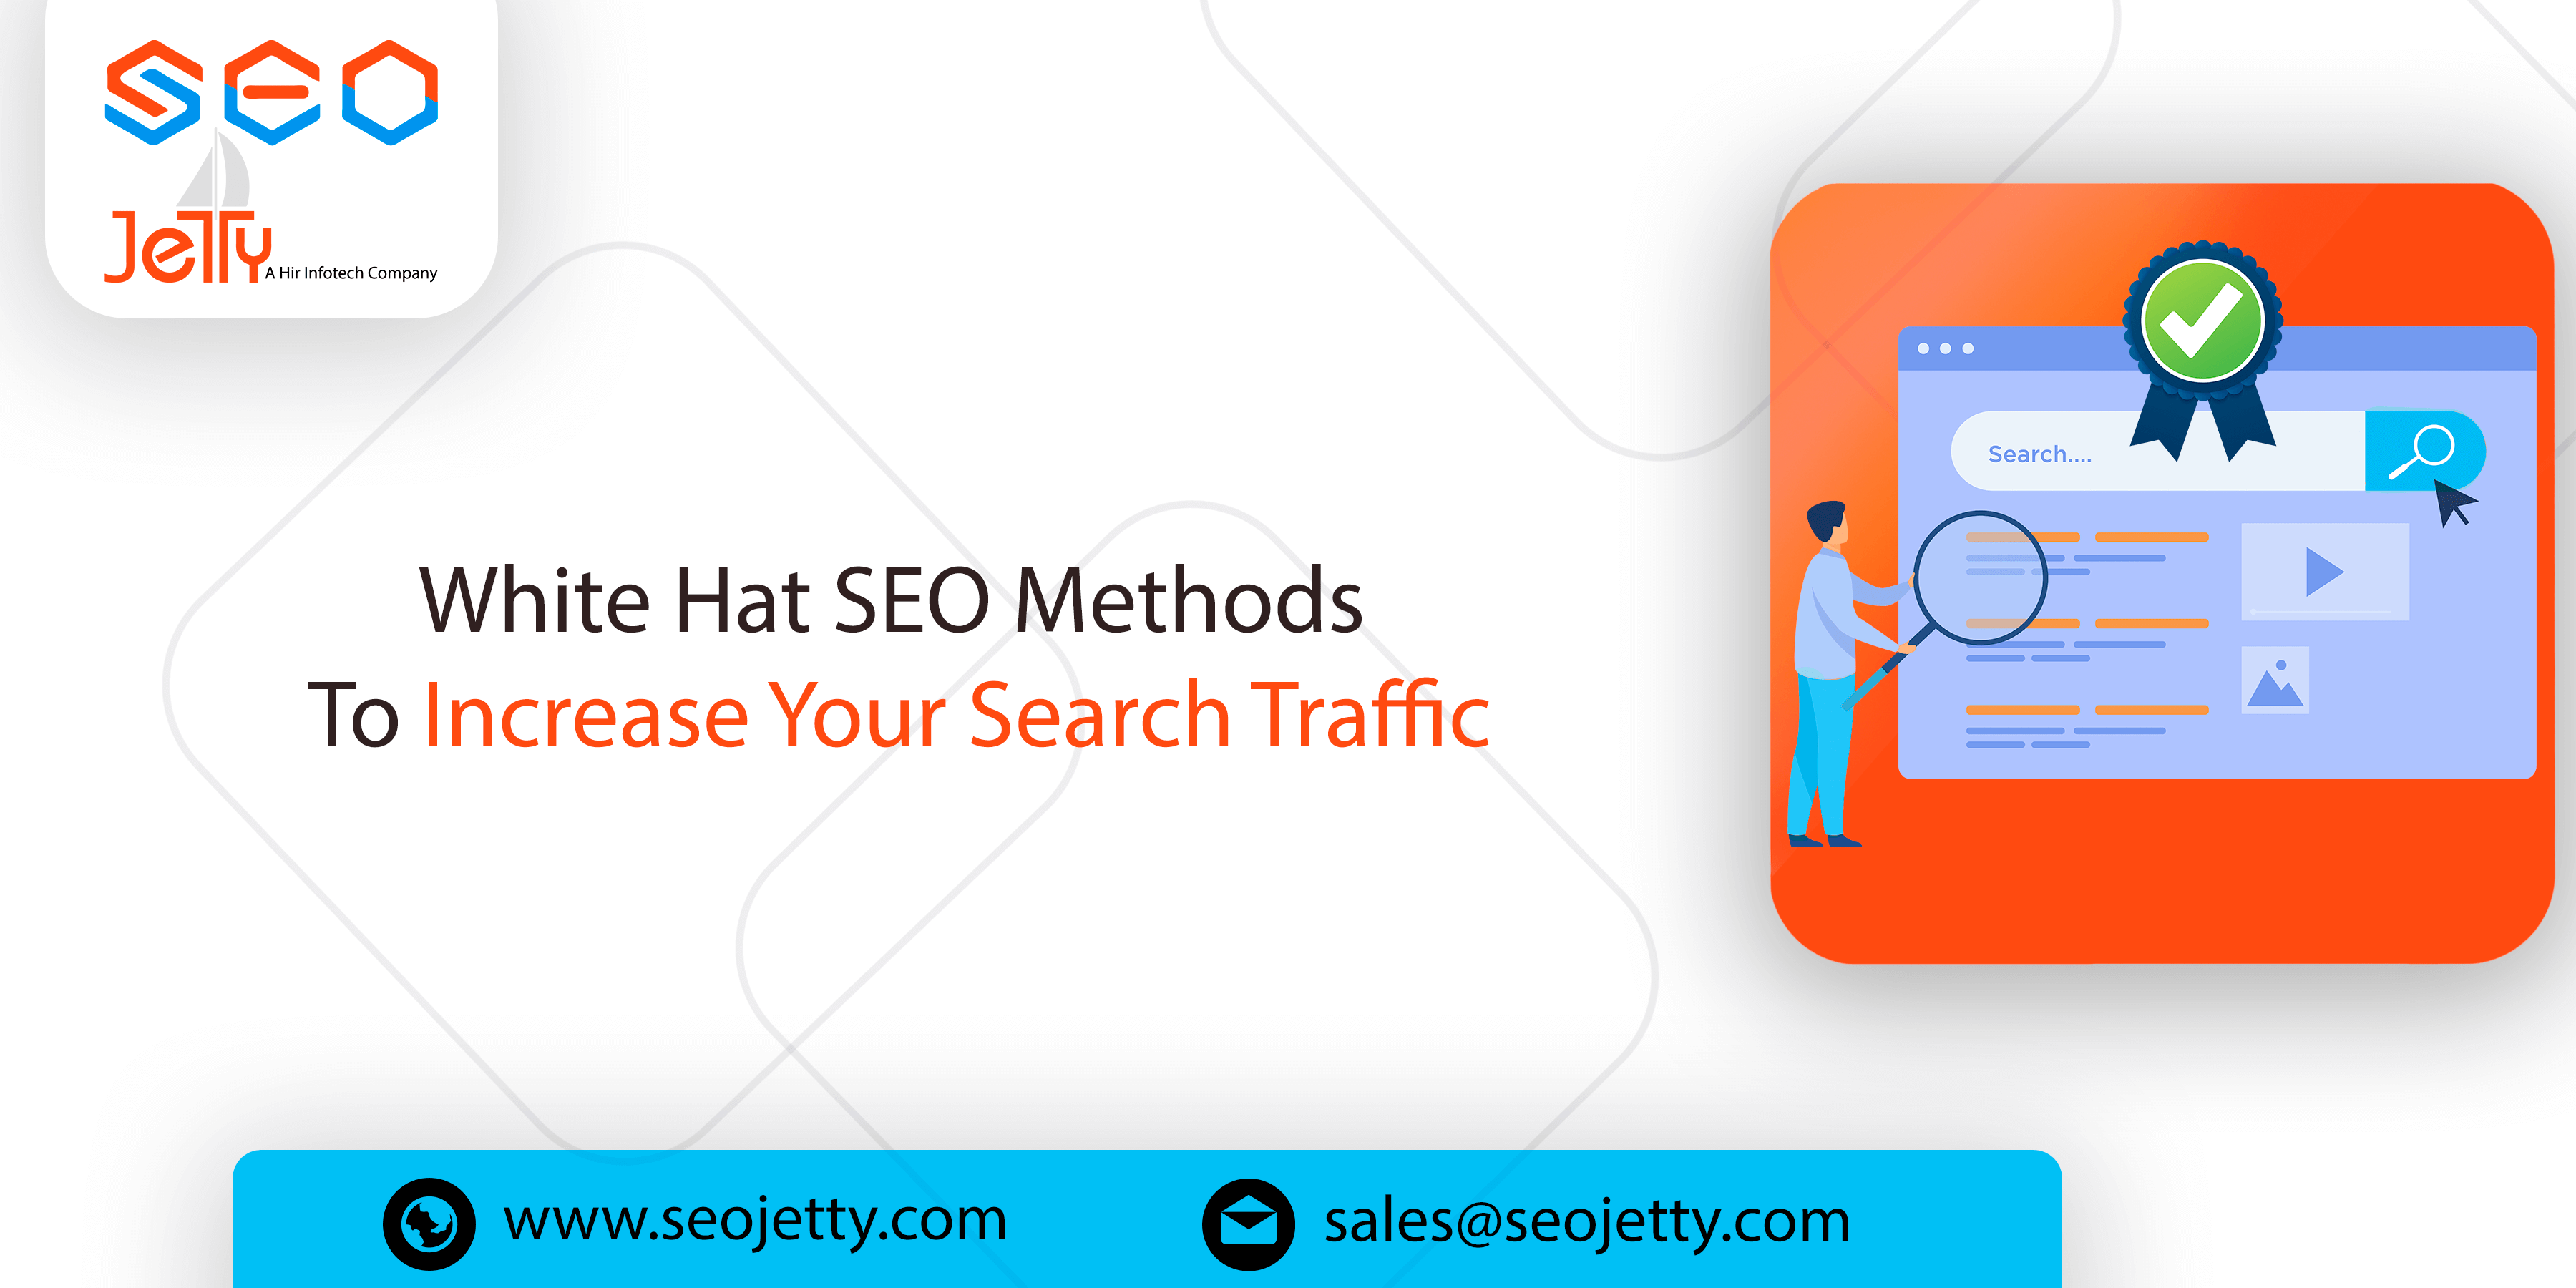 White Hat SEO Methods To Increase Your Search Traffic